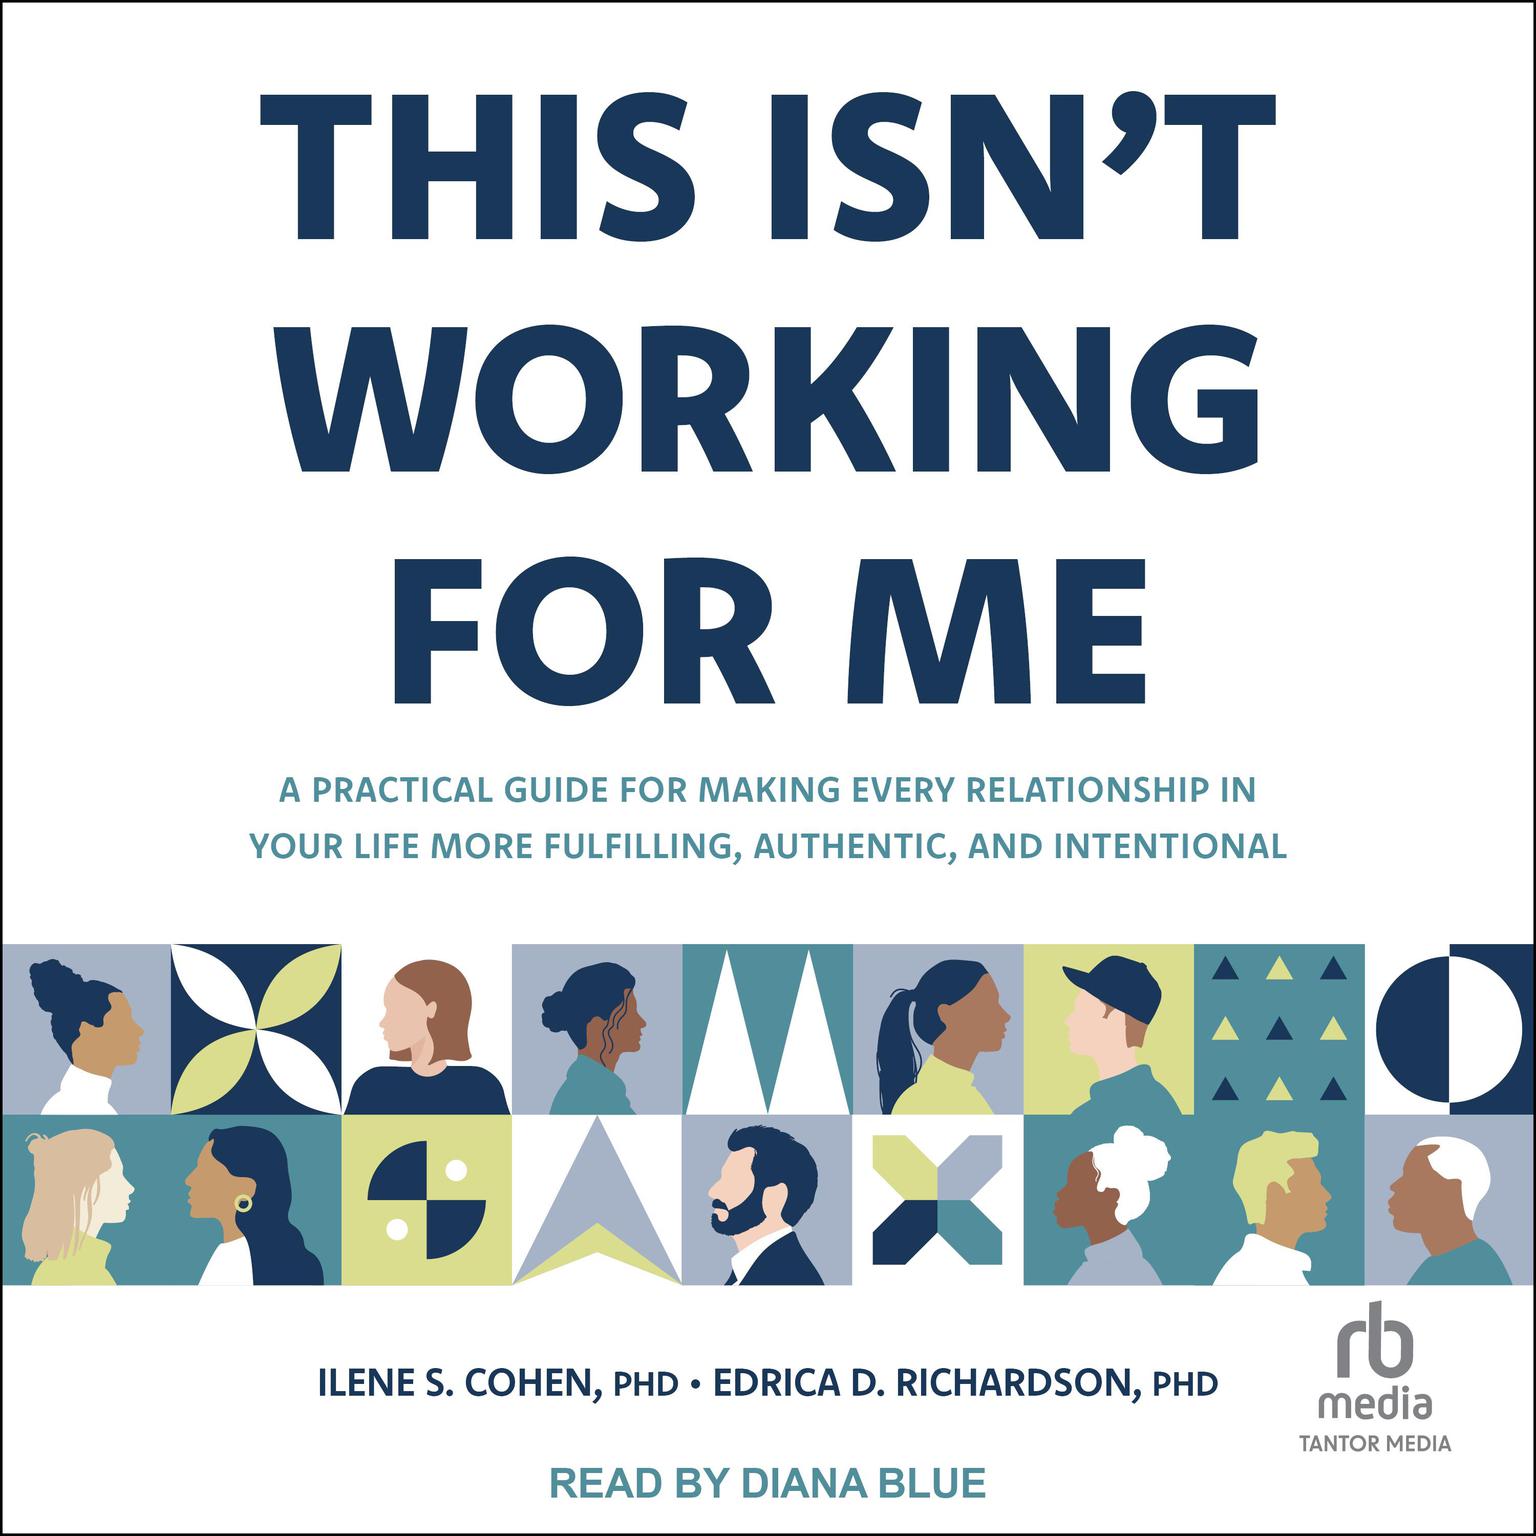 This Isnt Working for Me: A Practical Guide for Making Every Relationship in Your Life More Fulfilling, Authentic, and Intentional Audiobook, by Edrica D. Richardson